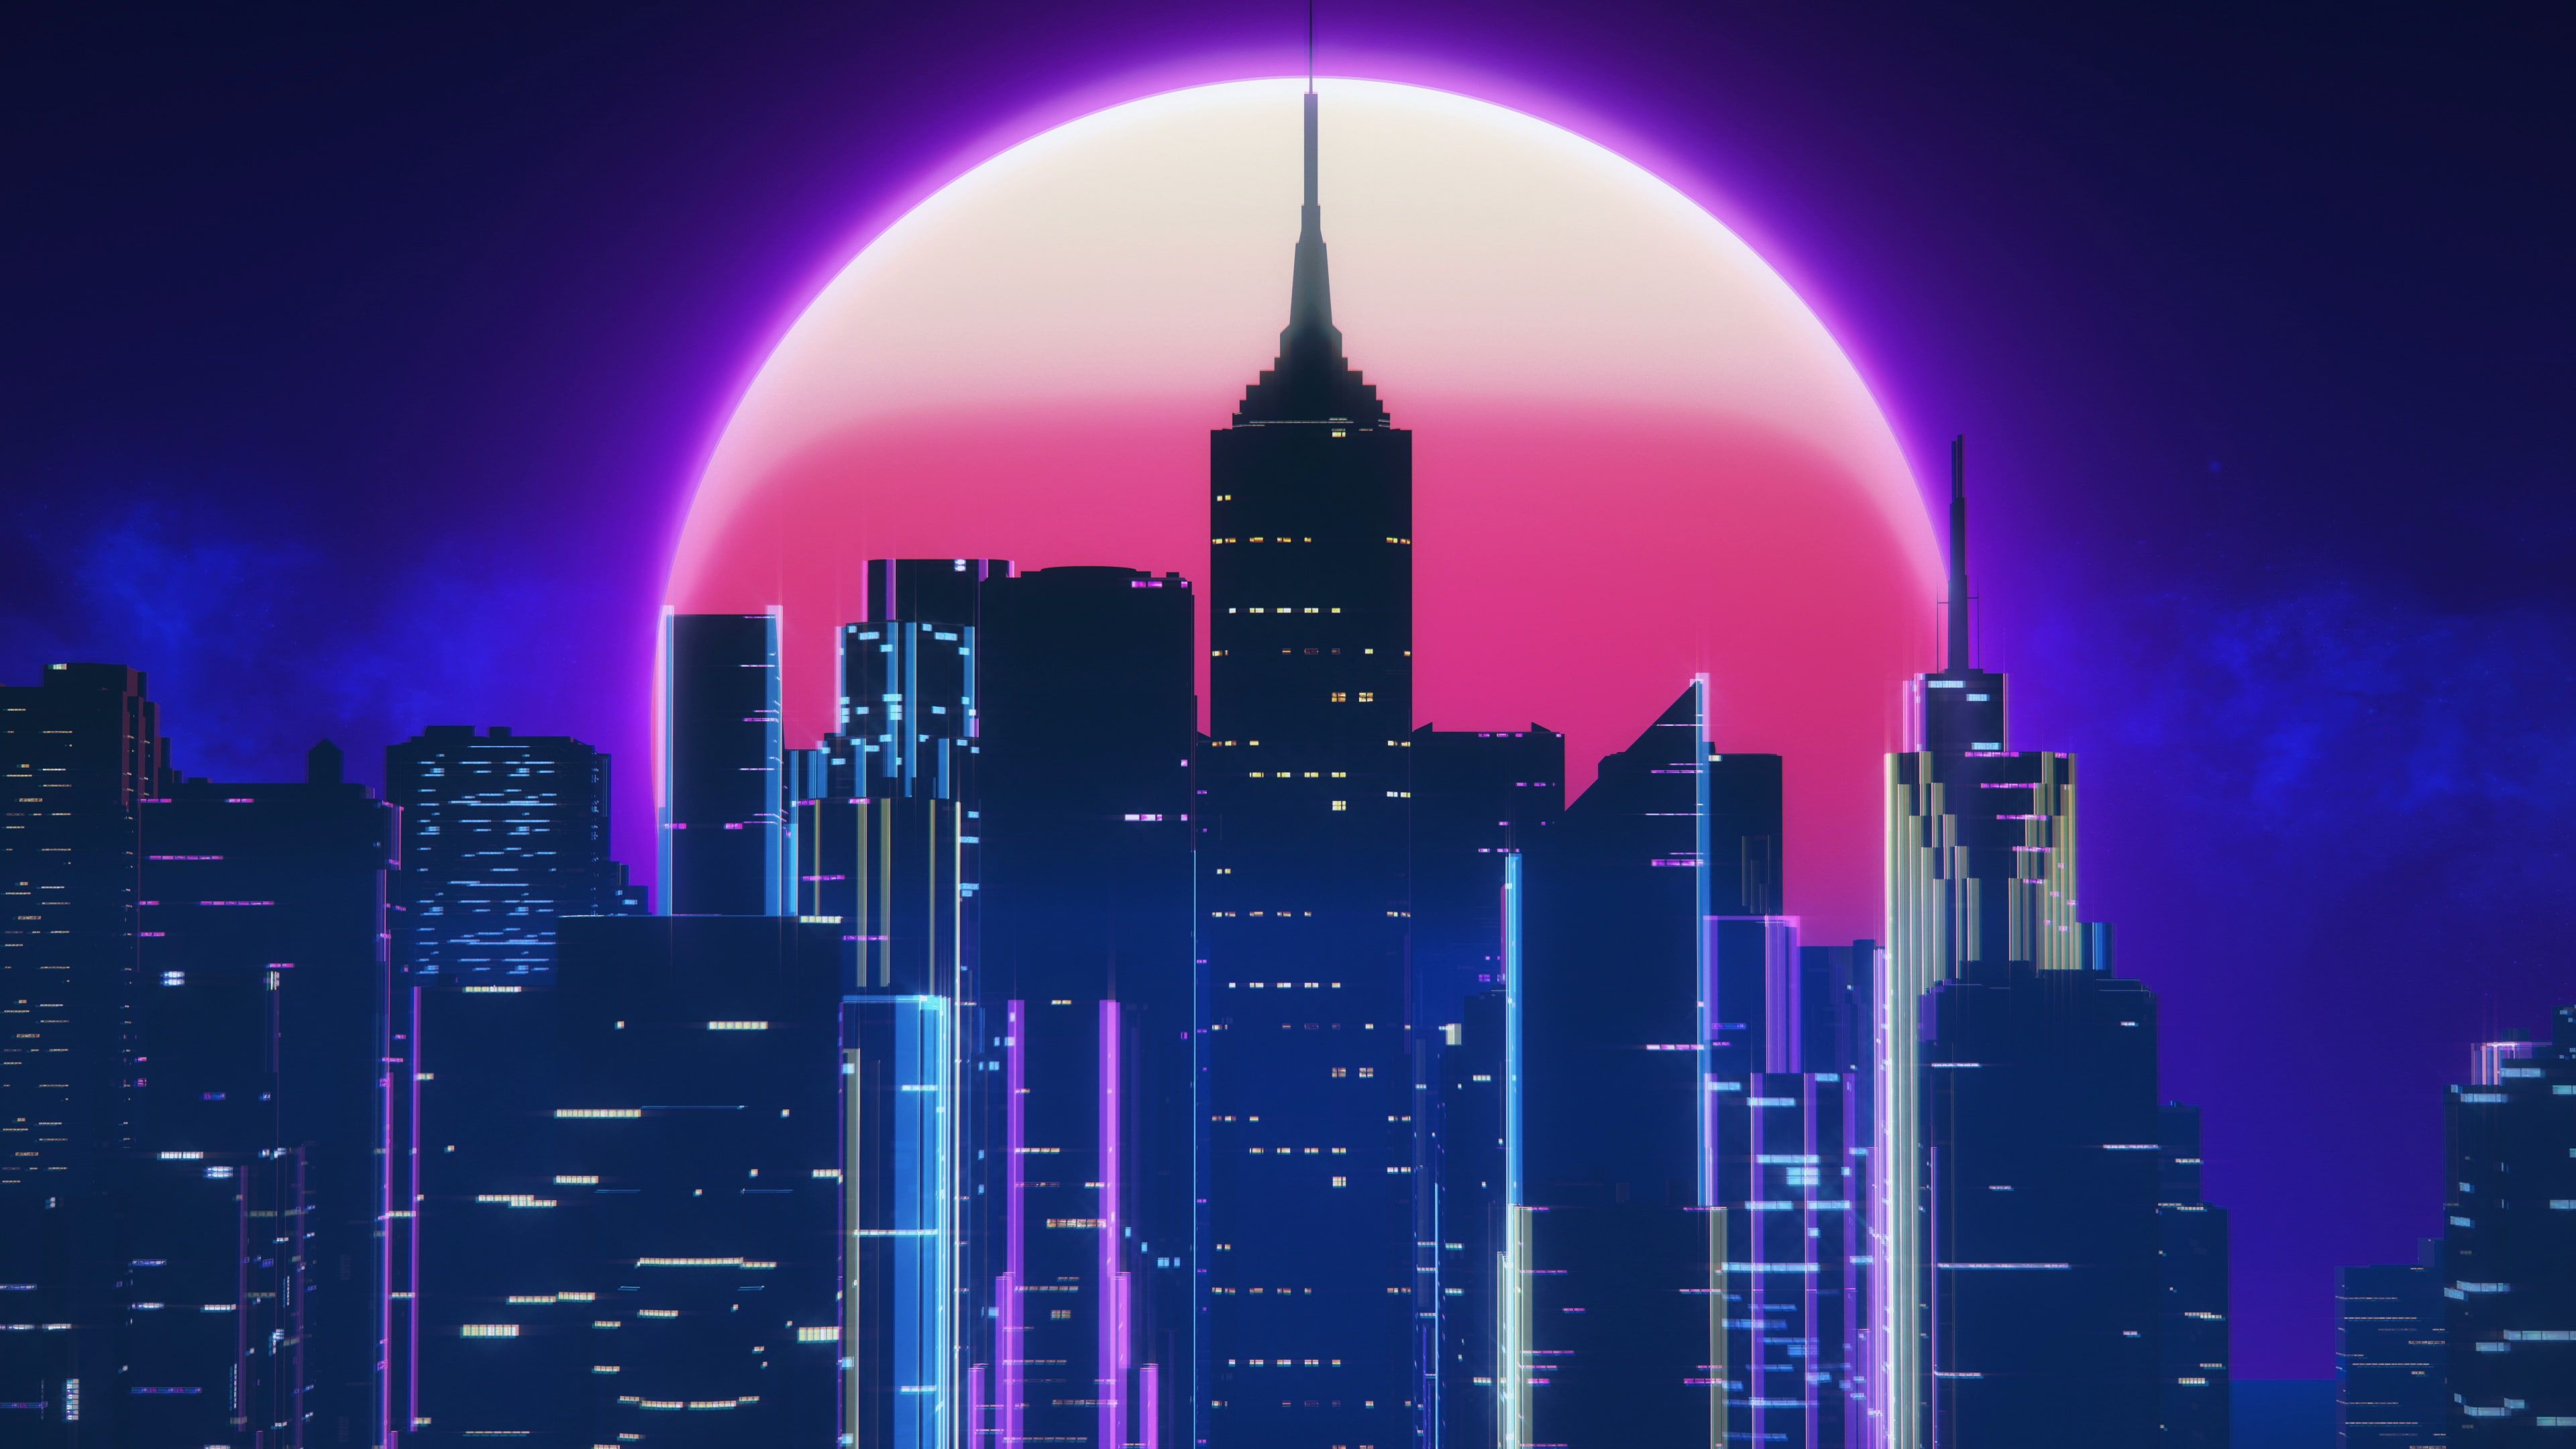 Night #Music The city The moon #Style #Neon 's #Synth #Retrowave #Synthwave New Retro Wave #Futuresynth. City wallpaper, Vaporwave wallpaper, Neon wallpaper